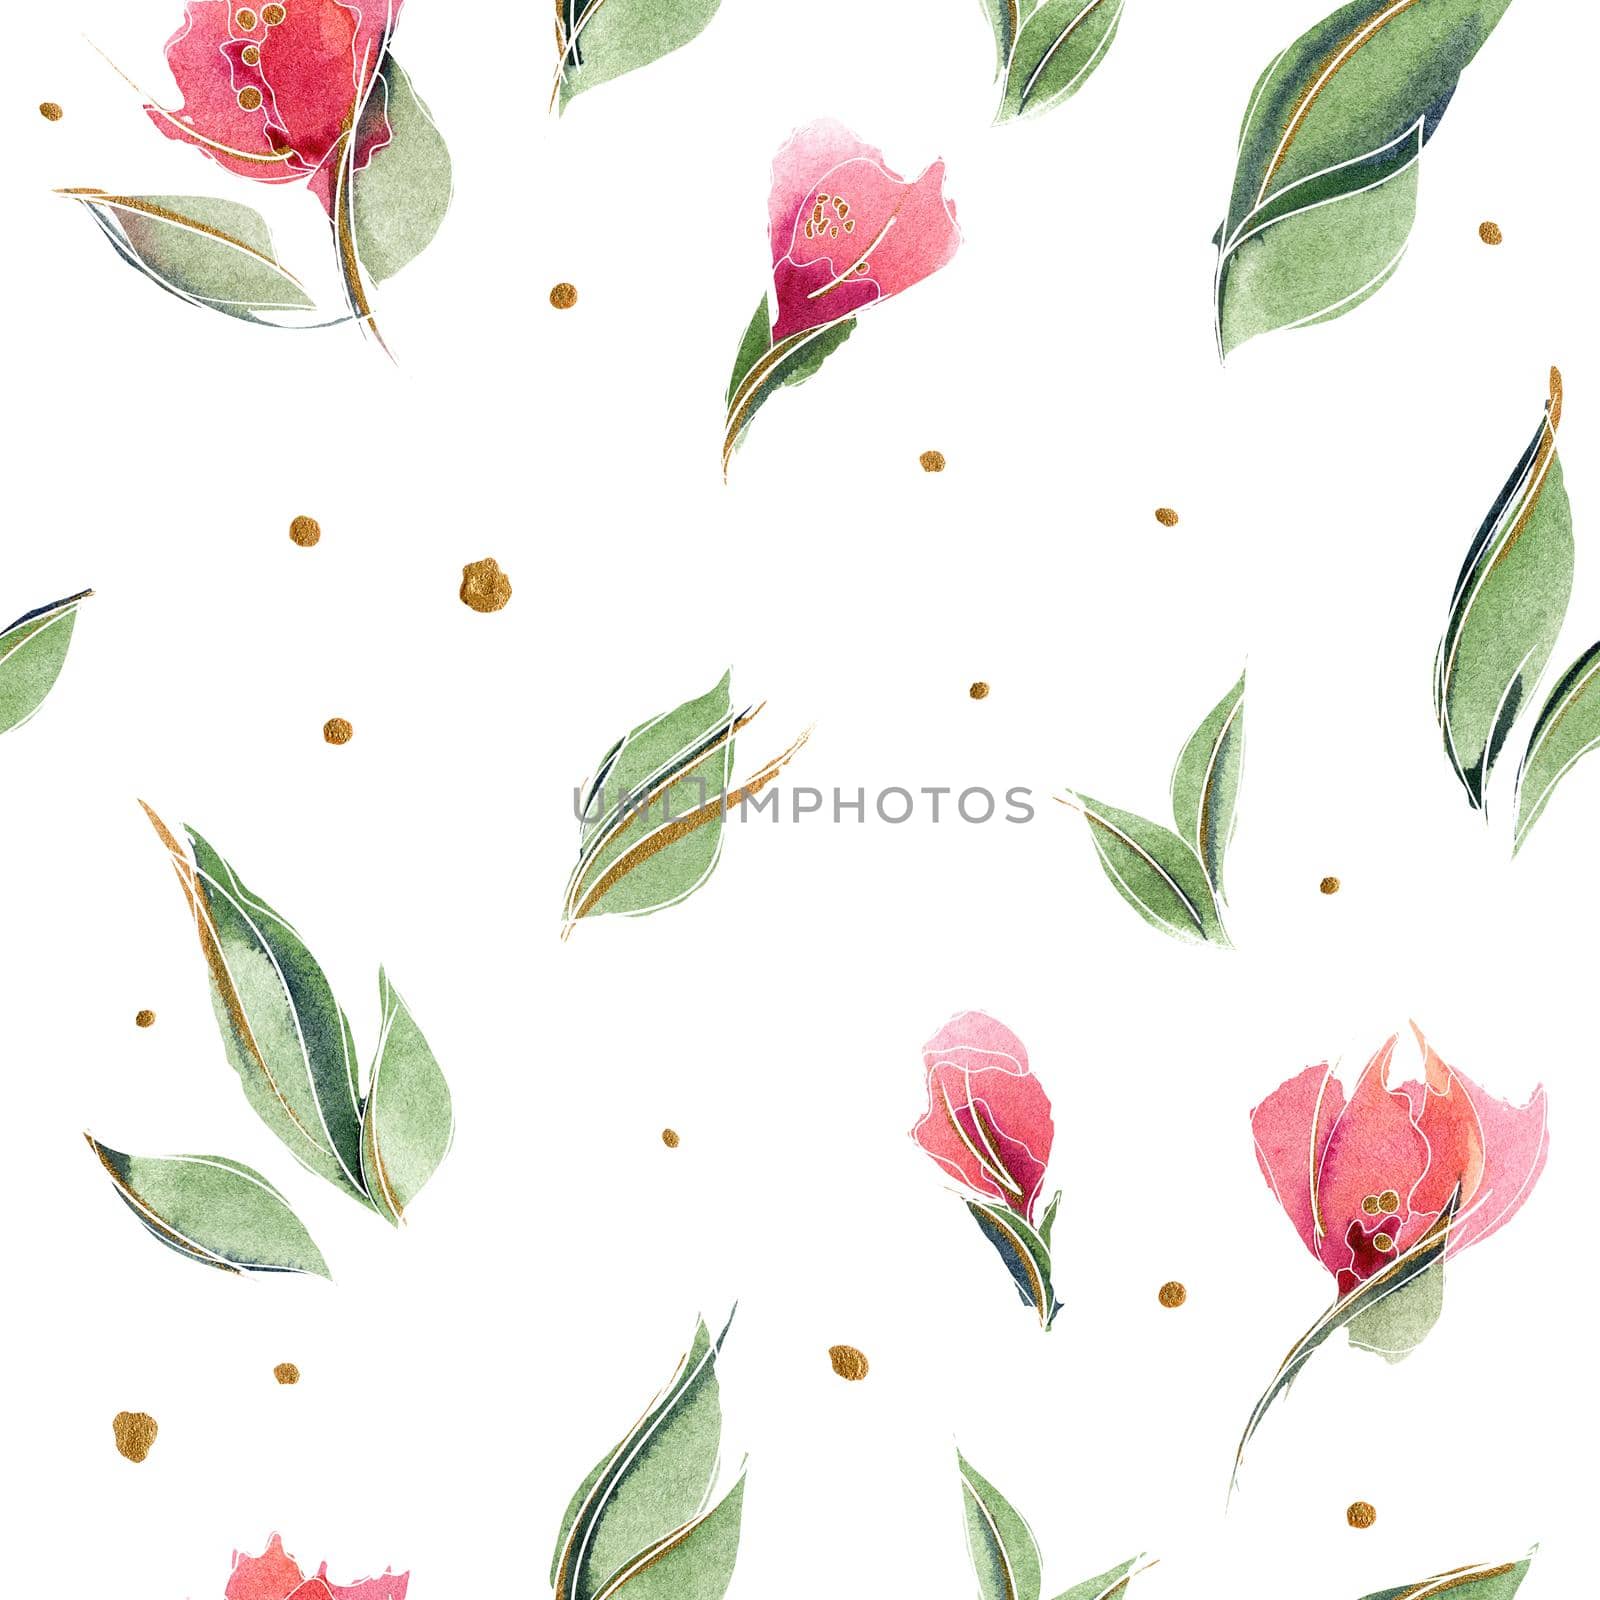 Pink floral seamless pattern with delicate rose buds by Xeniasnowstorm